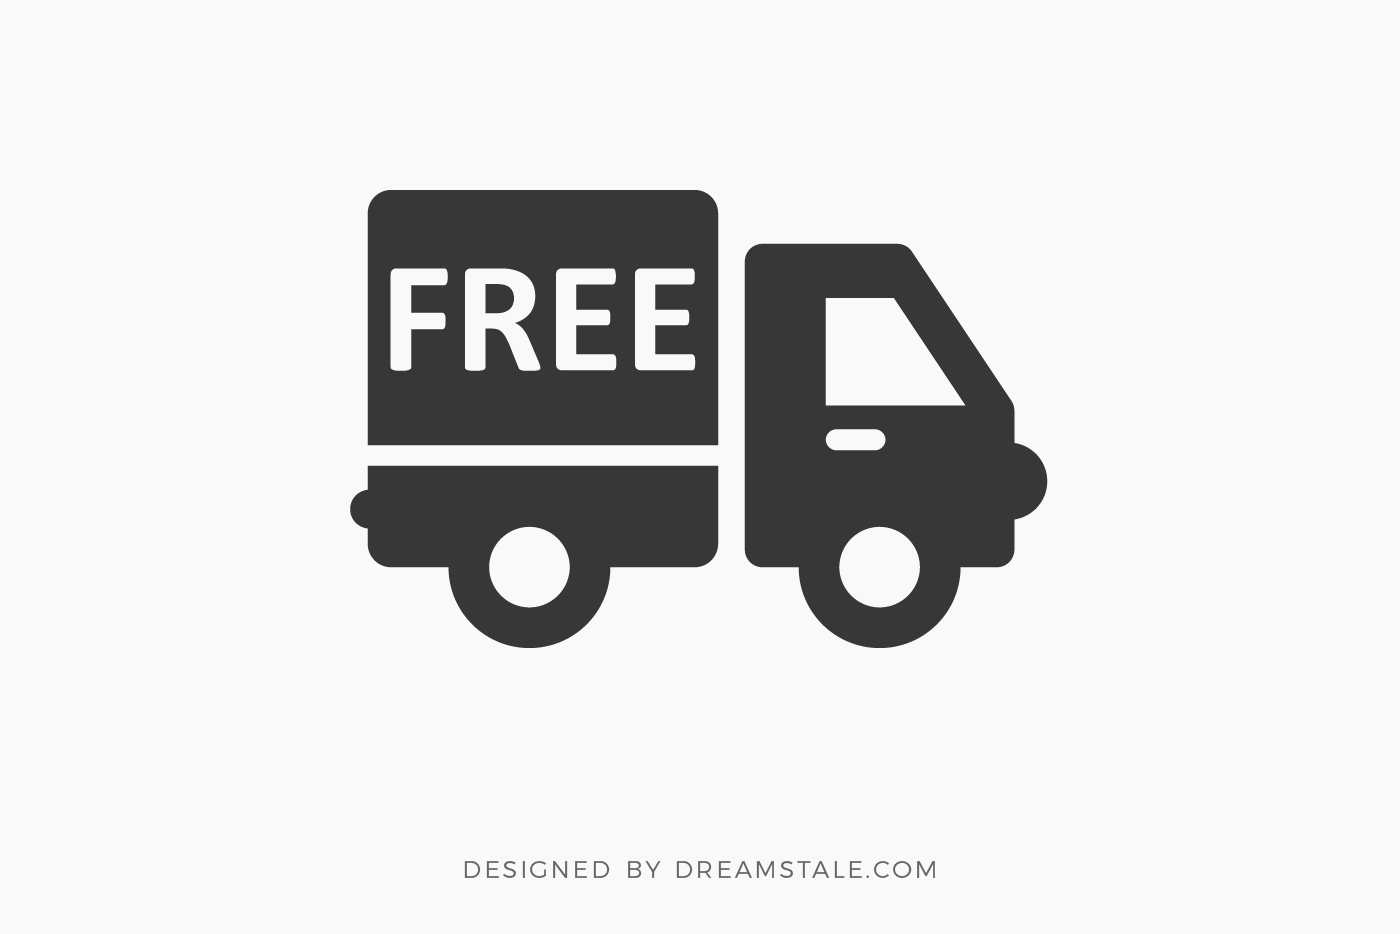 Download Free Svg Shipping Delivery Truck Clipart Dreamstale